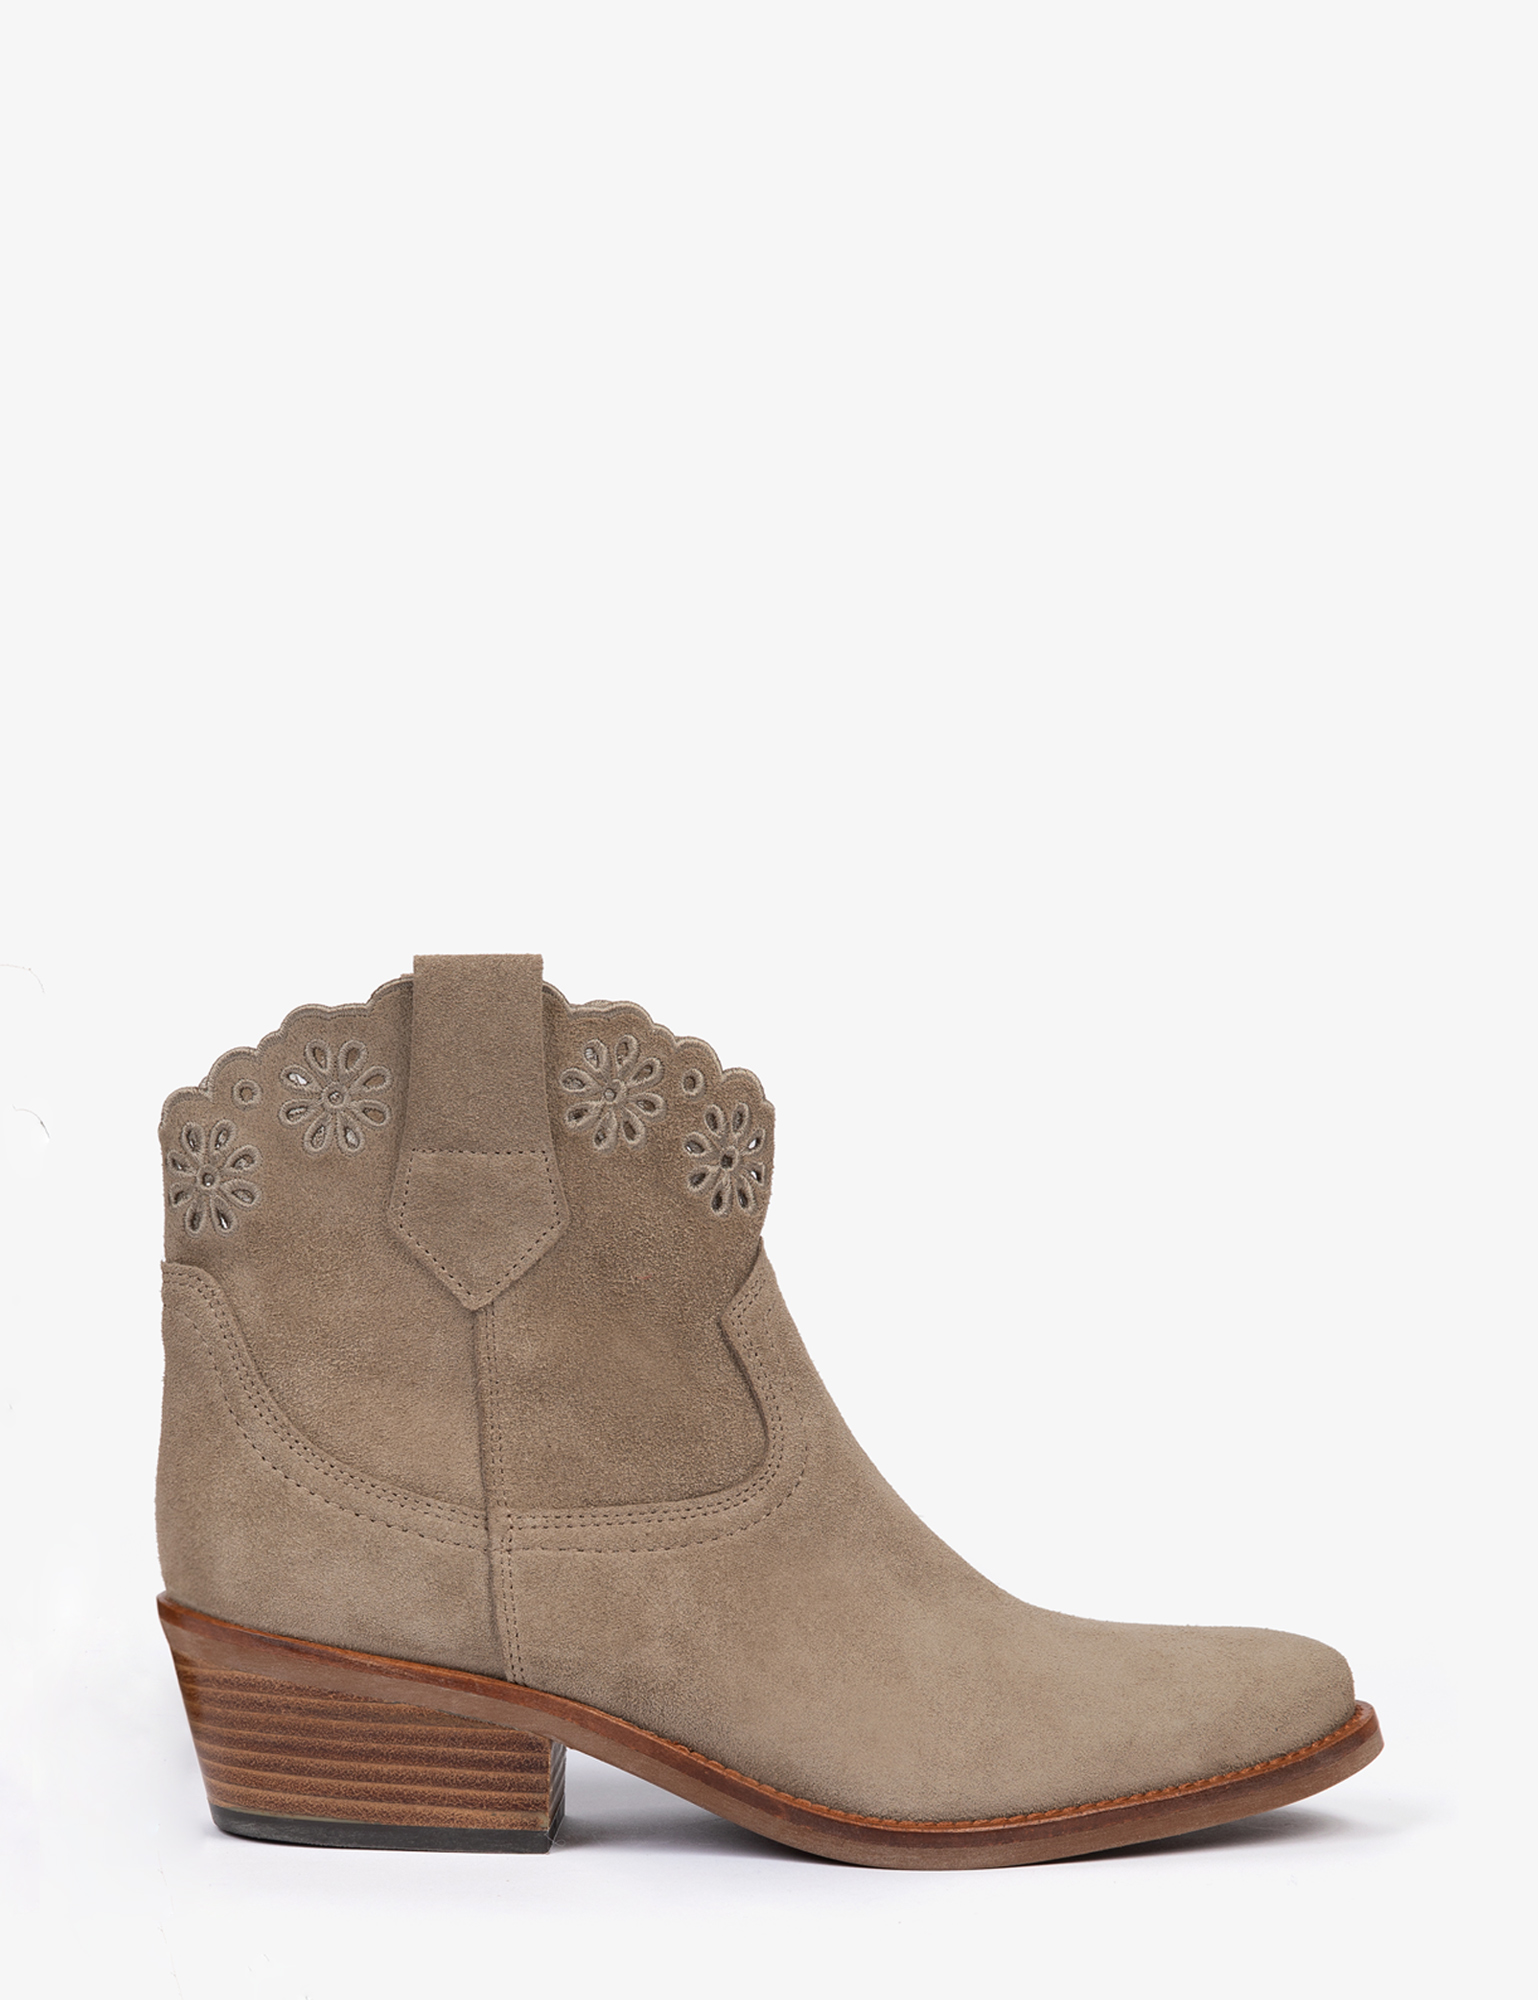 Cali Broderie Suede Cowboy Boot